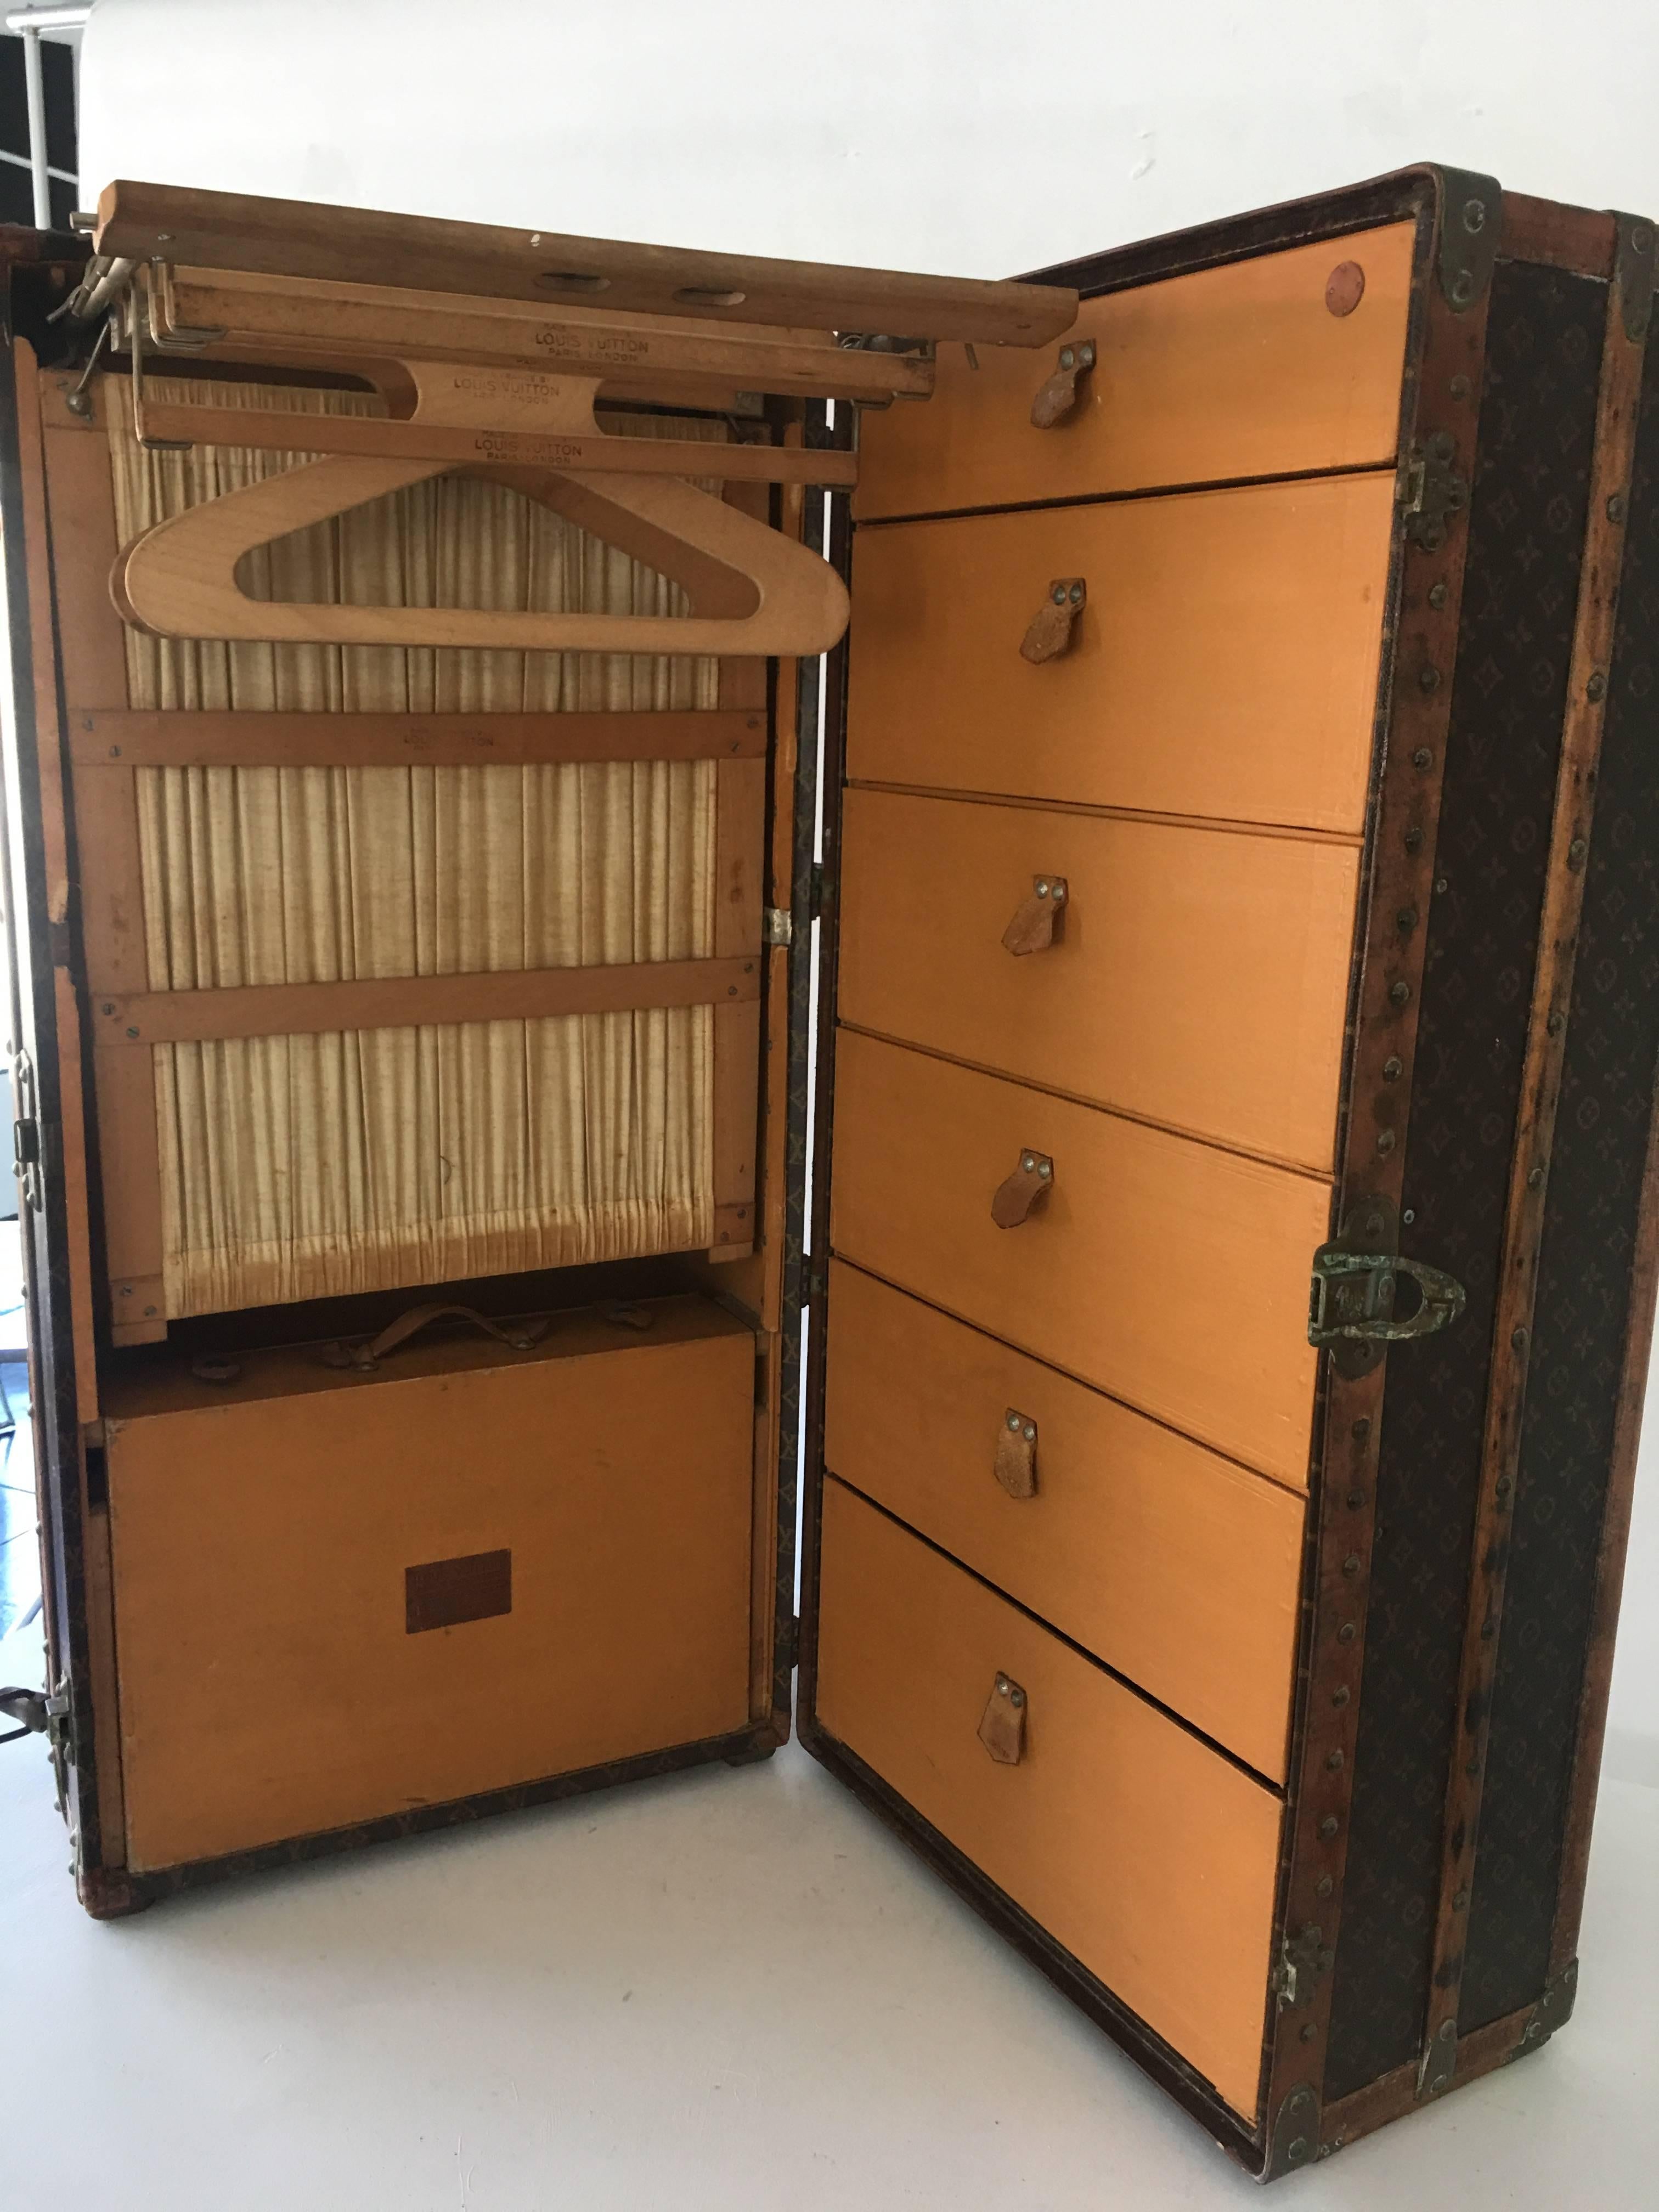 Rare Louis Vuitton wardrobe trunk with all original hardware, monogrammed coat hangers, and leather handle.